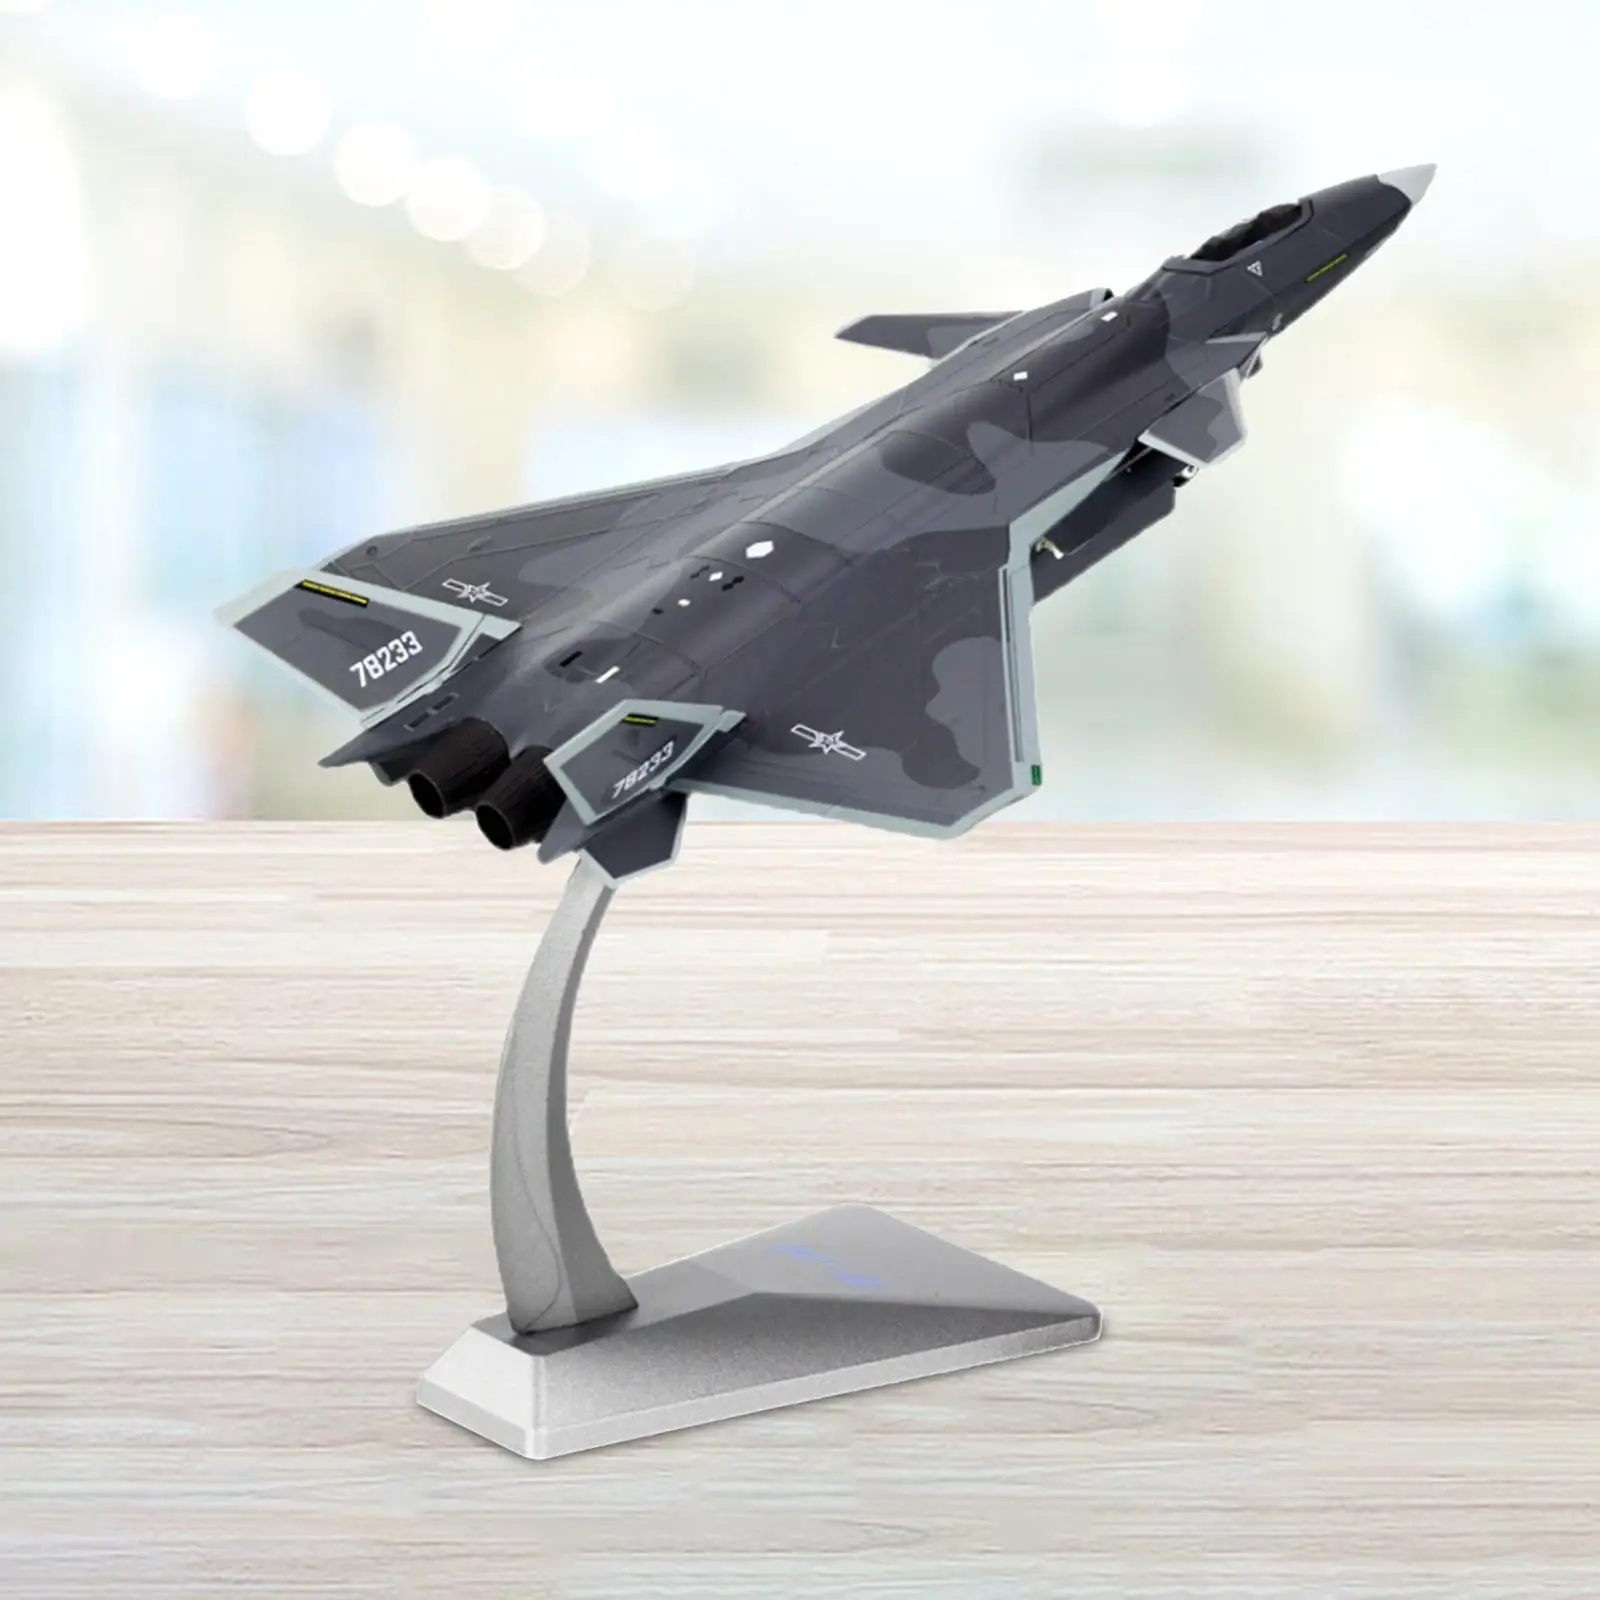 

1/72 Scale J20 Fighter Alloy Model Kids Toys Adults Gifts Collection Aircraft Ornament Airplane for Bookshelf Tabletop Decor